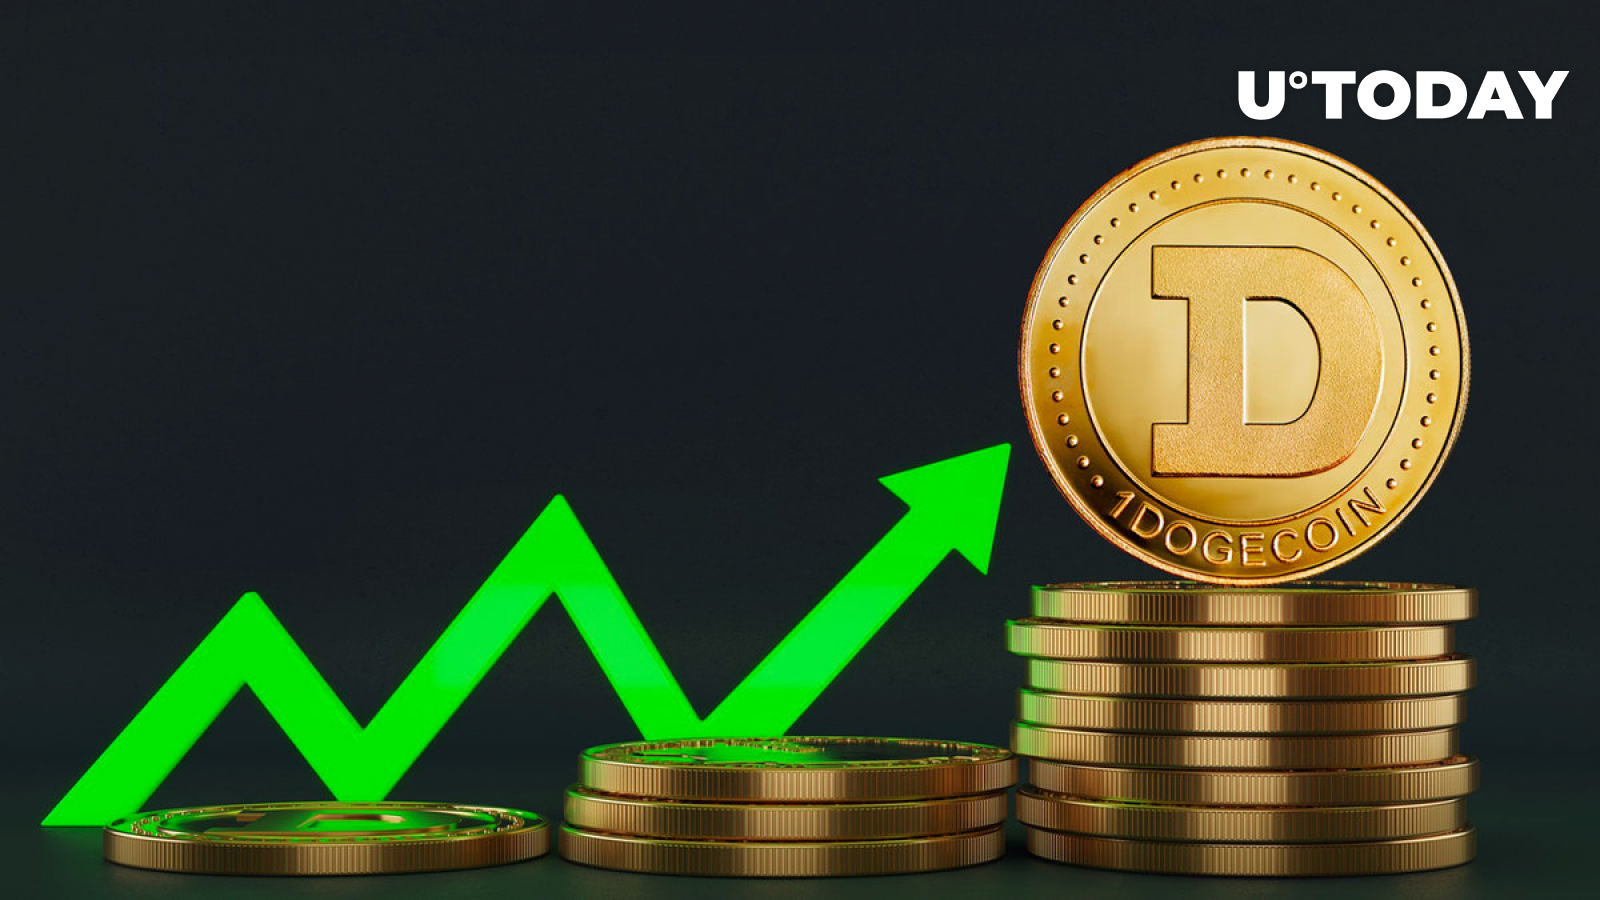 Here’s One Exciting Thing About Dogecoin’s Growth